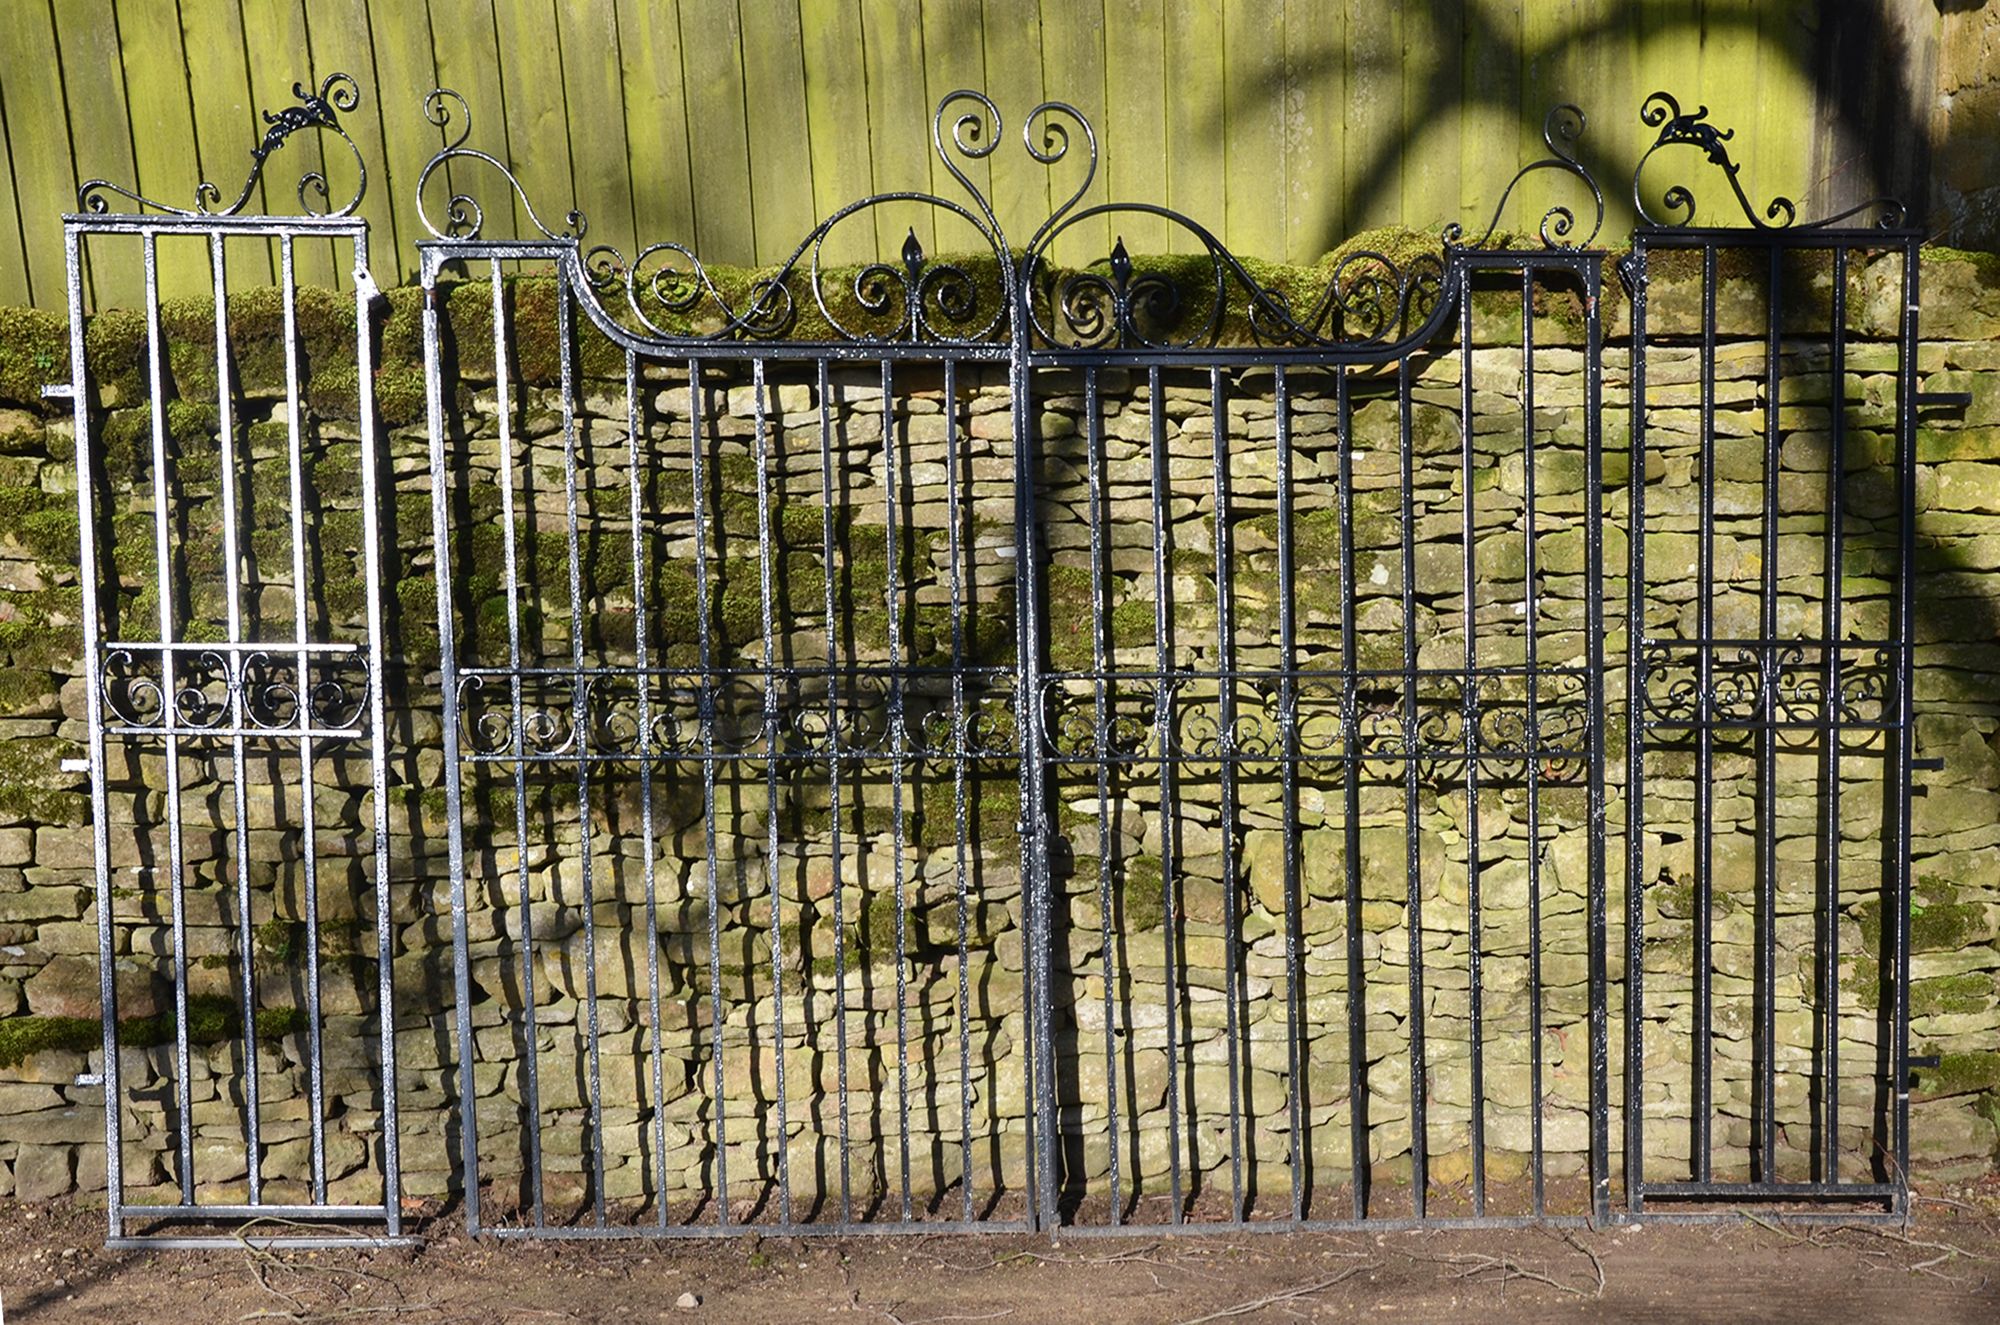 A pair of large garden gates - ARCHITECTURAL HERITAGE